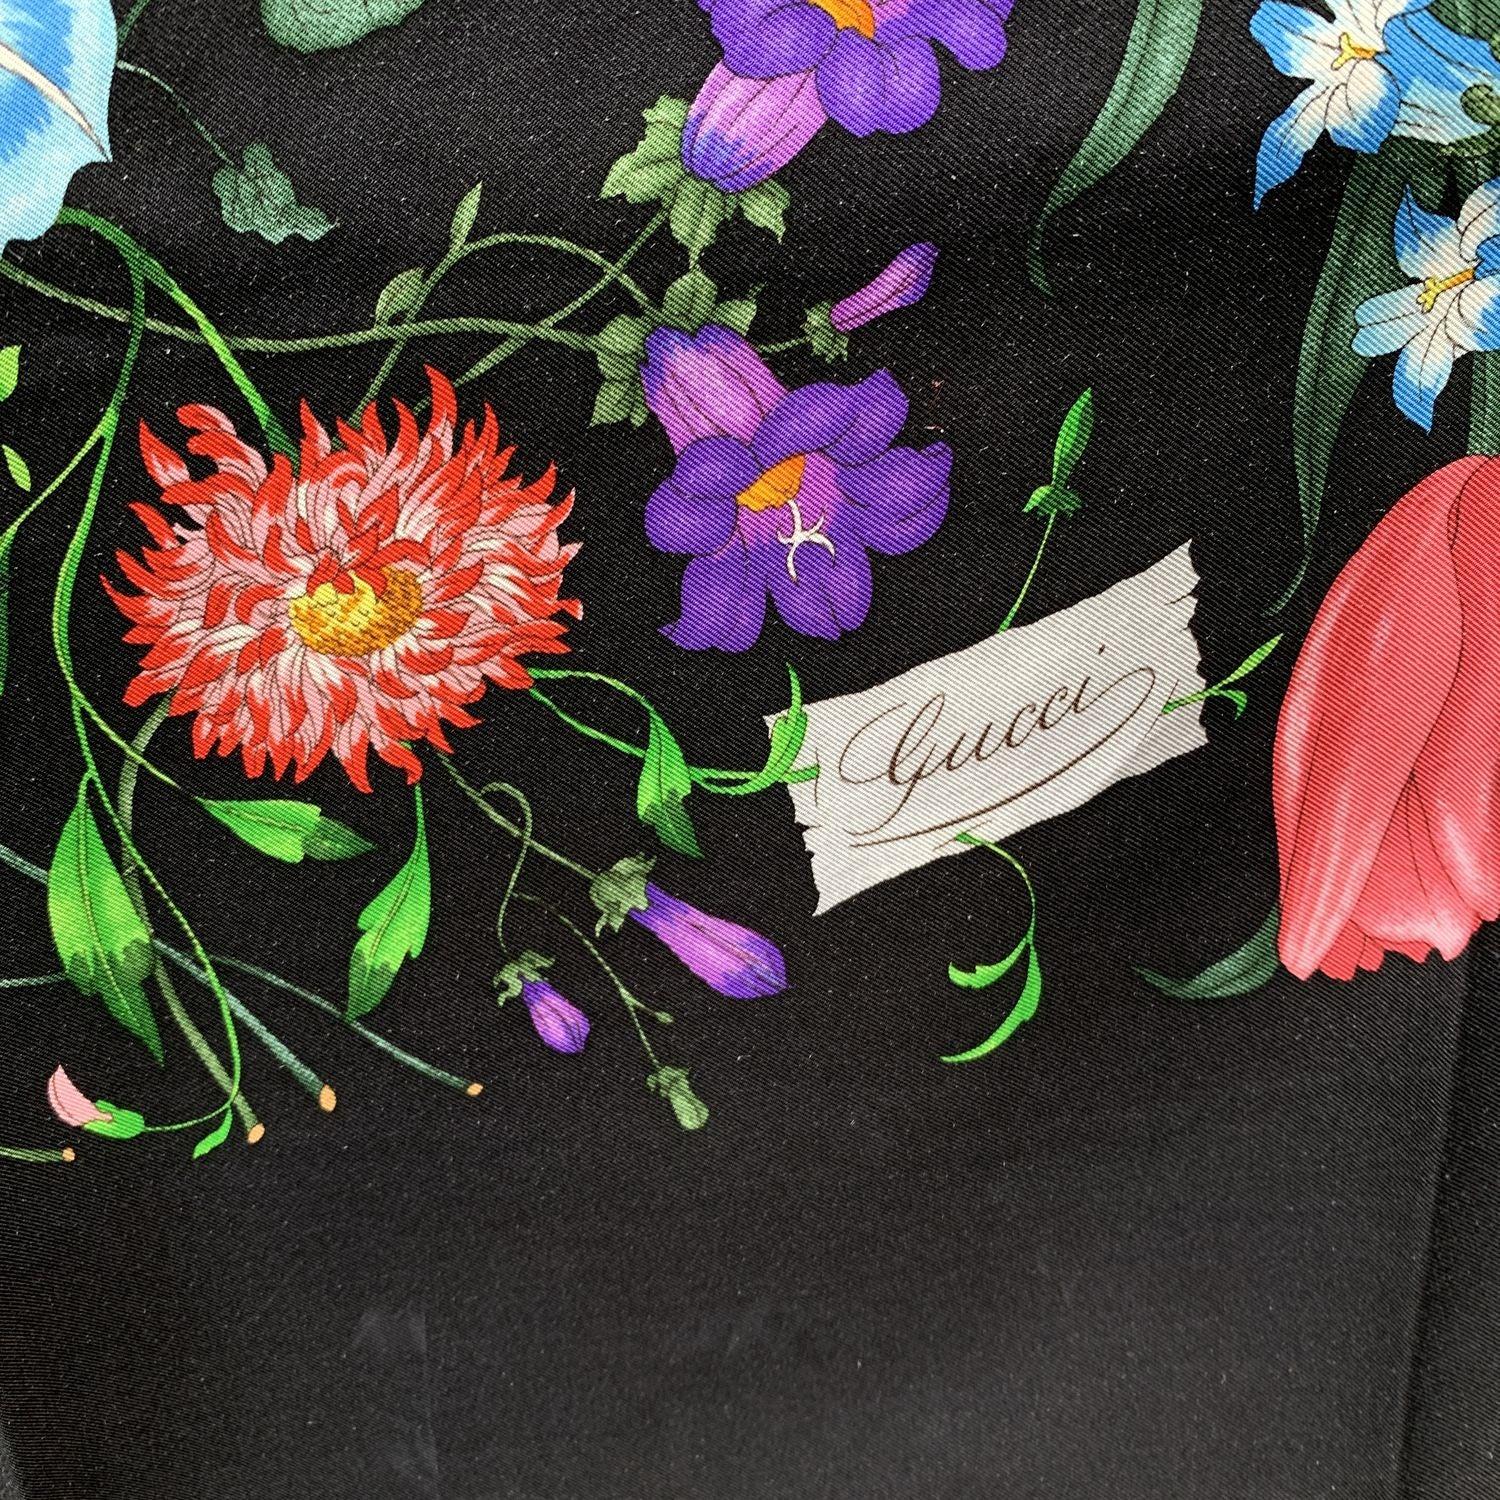 - Title: 'Flora' - Multicolor floral design on black background - 100% Silk - Printed GUCCI signature The Flora design born in 1966 by the artist Vittorio Accornero. He was the textile designer for Gucci between the 1960s and 1981. The Flora design